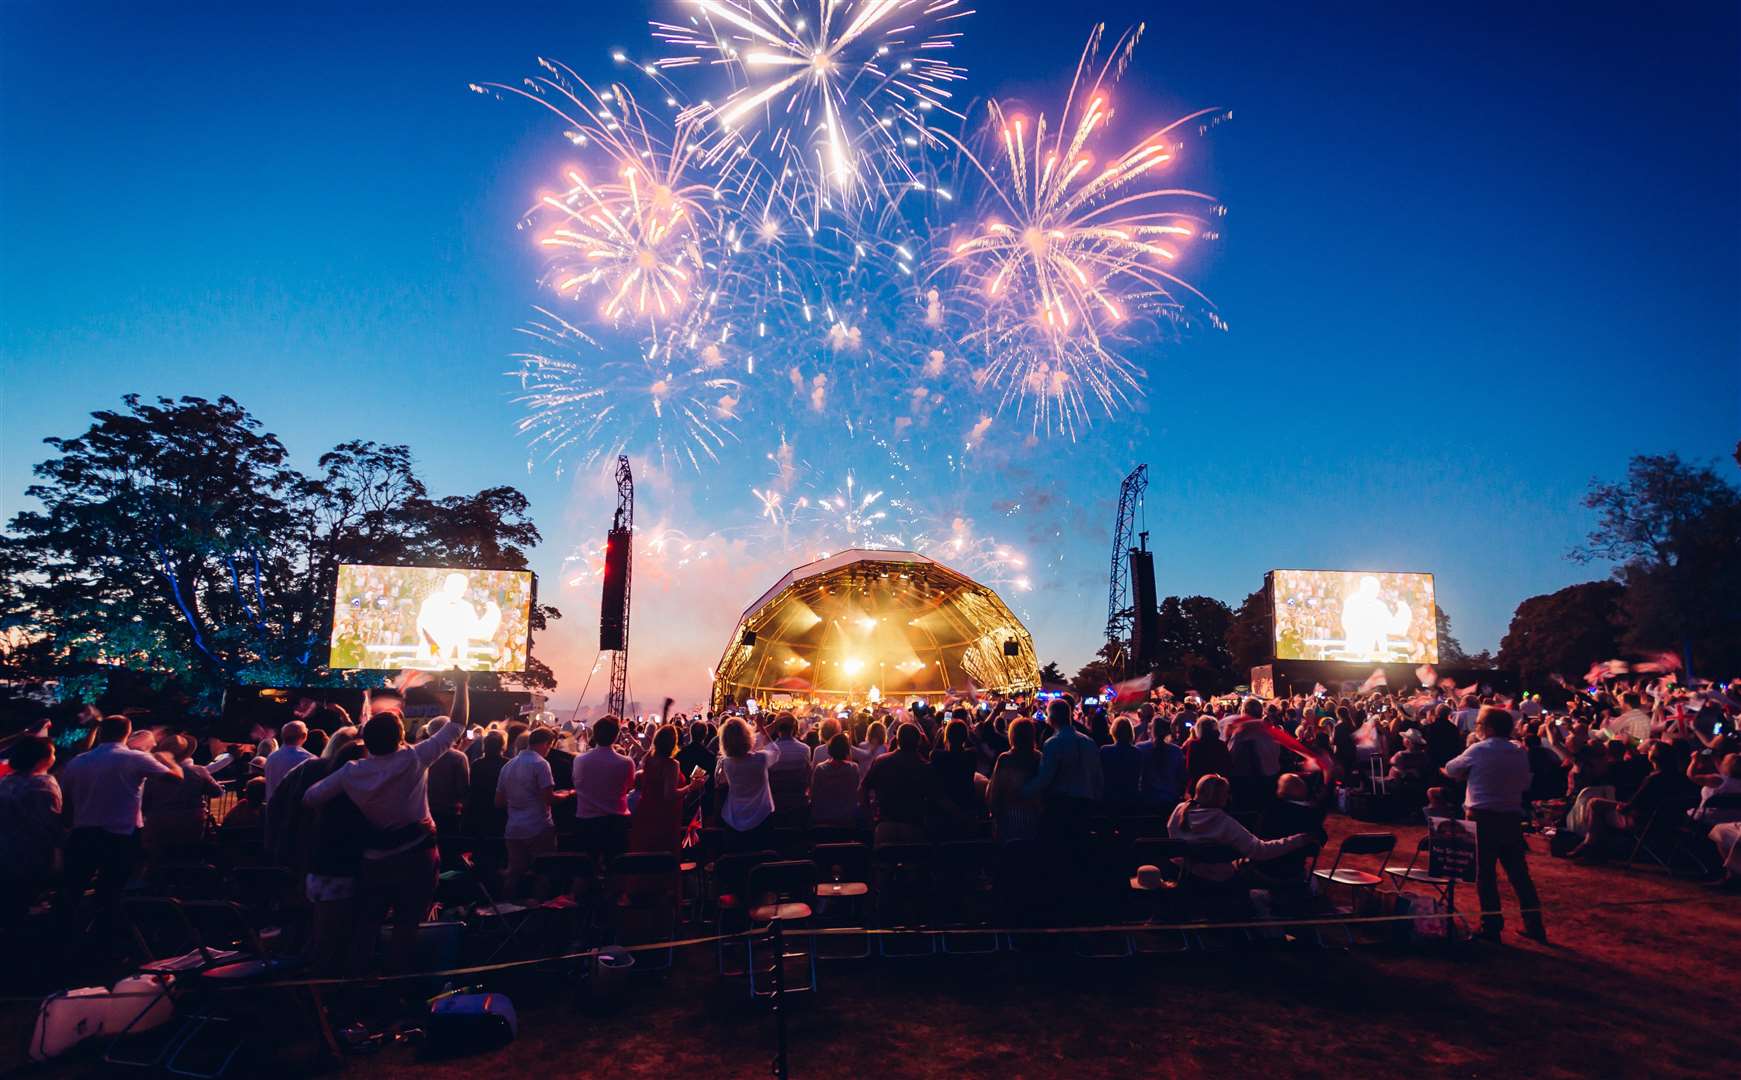 The Leeds Castle classical concert will be back in the summer